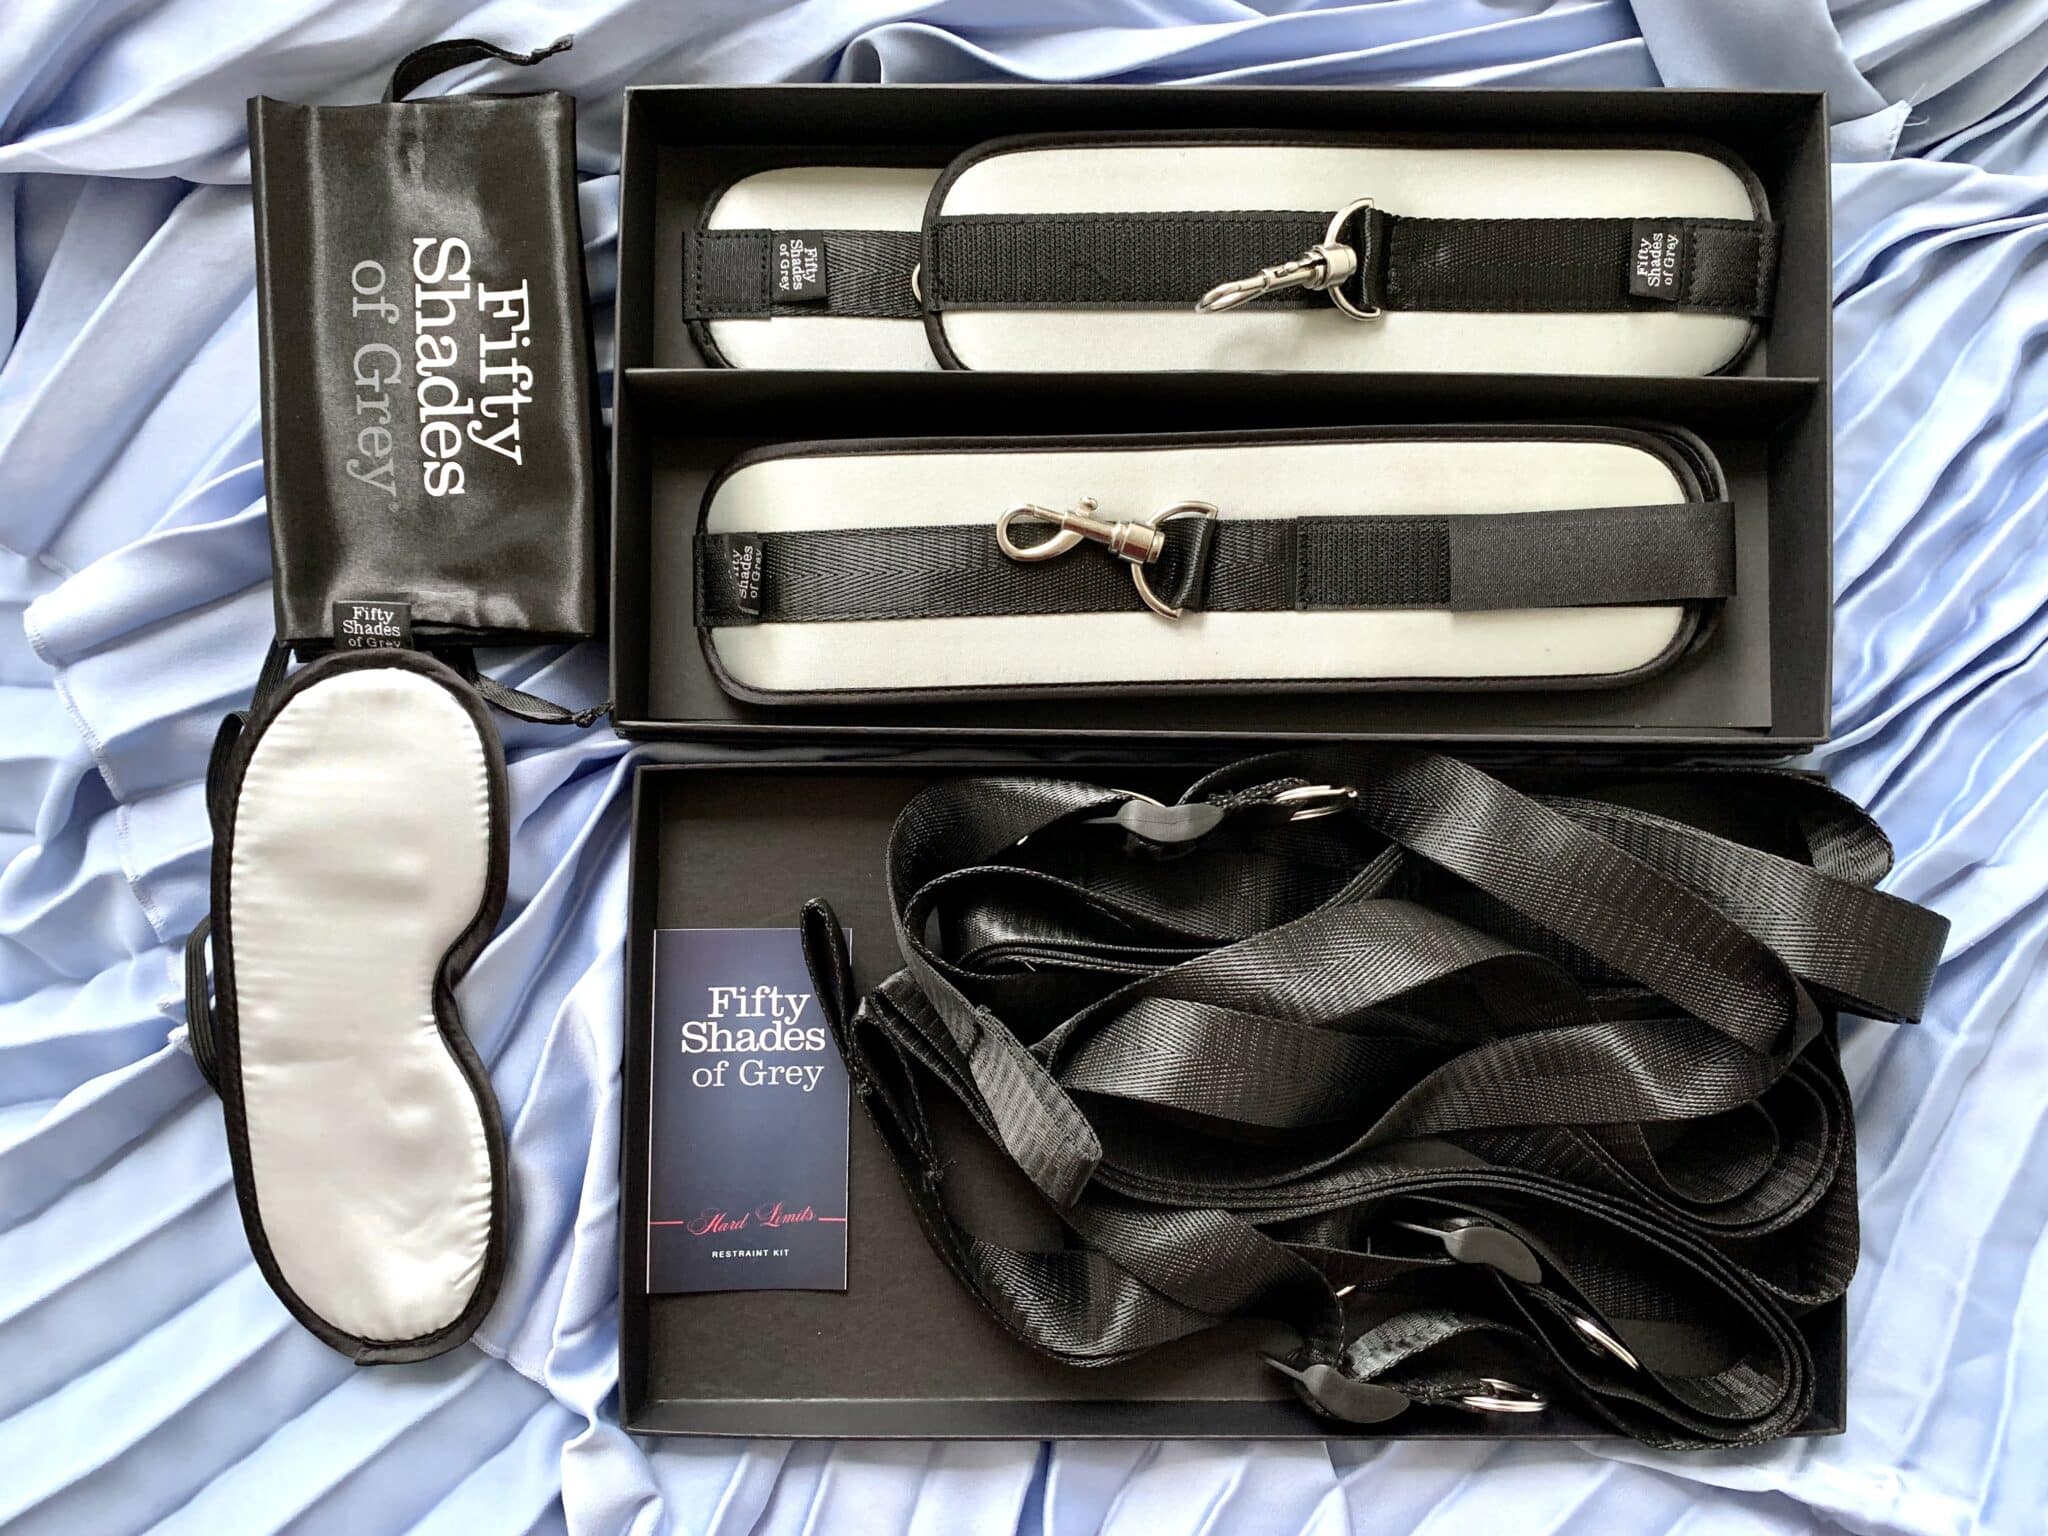 Fifty Shades of Grey Hard Limits Bed Restraint Kit. Slide 6